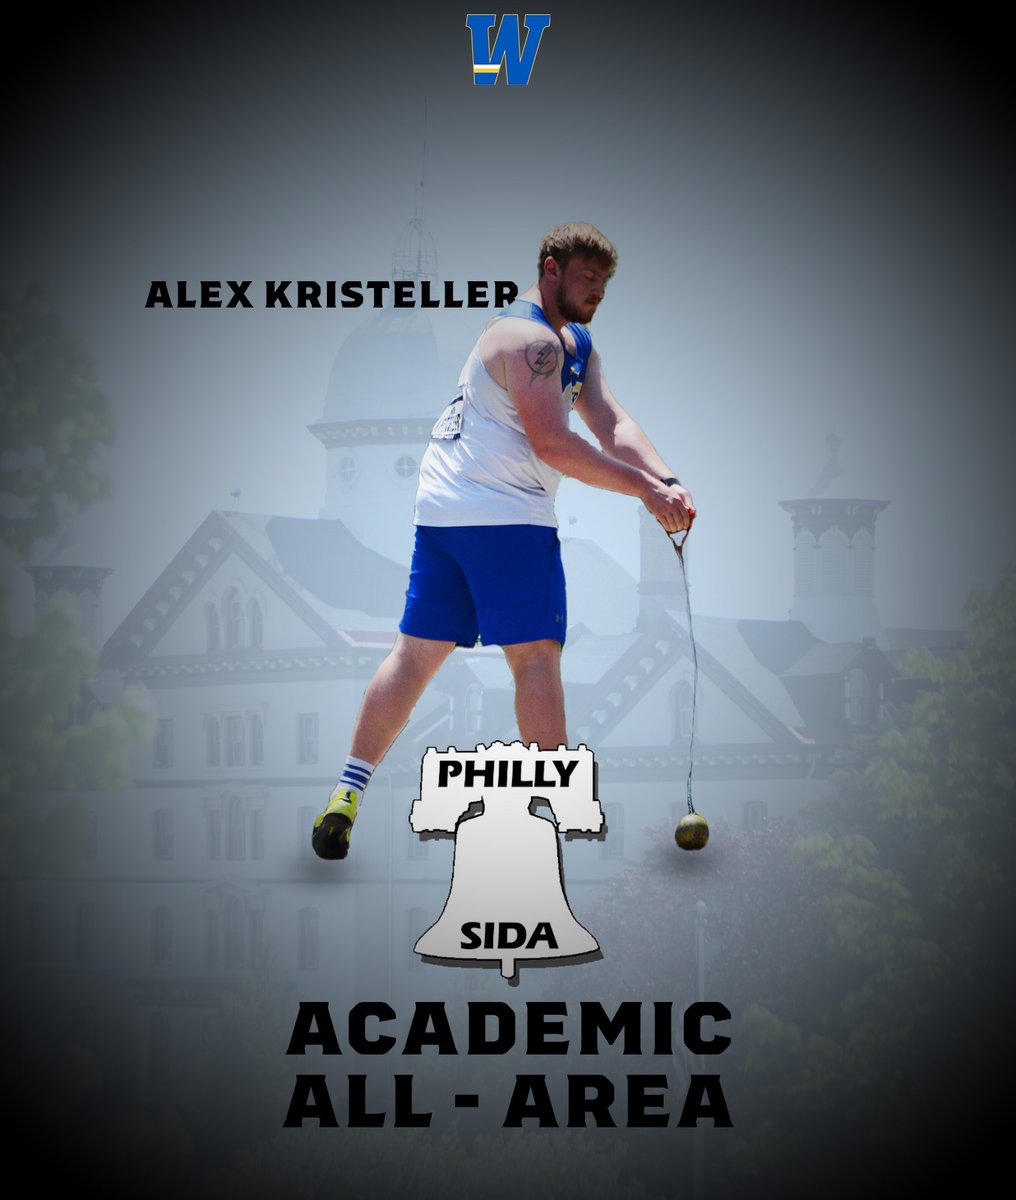 Weight throw National Champion grabs PhillySIDA Academic All-Area! Congrats Alex!!

#GoWidener #PlayWithPride